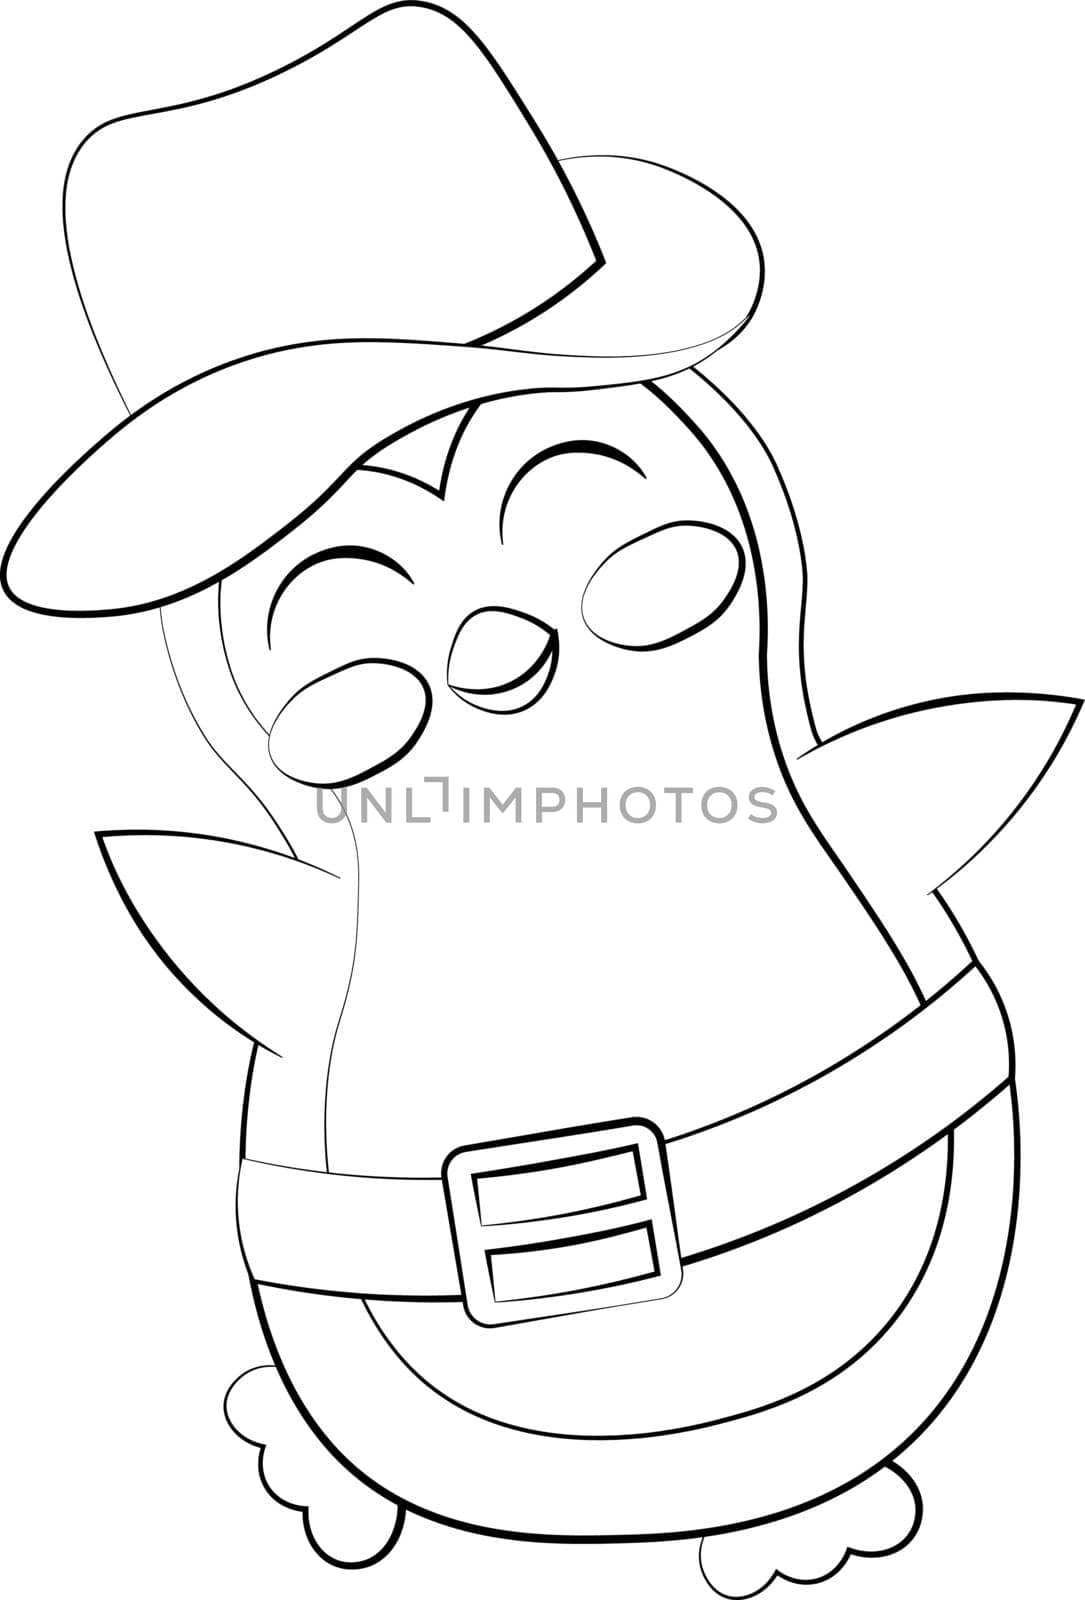 Cute cartoon Penguin Cowboy. Draw illustration in black and white by AnastasiaPen